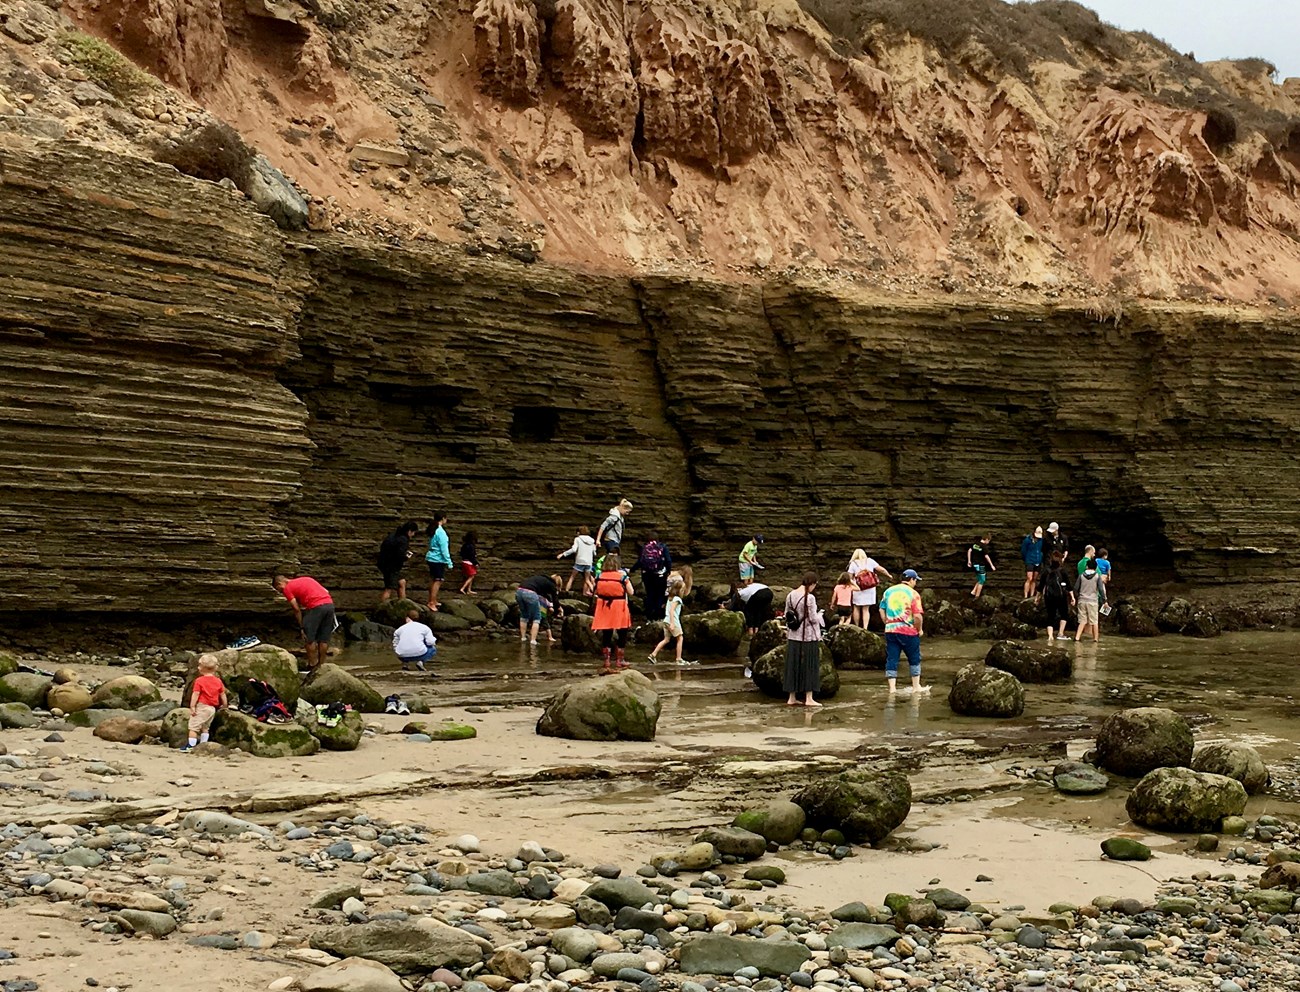 A variety of visitors walking and exploring the tidepools with brown sandstone cliffs in the background